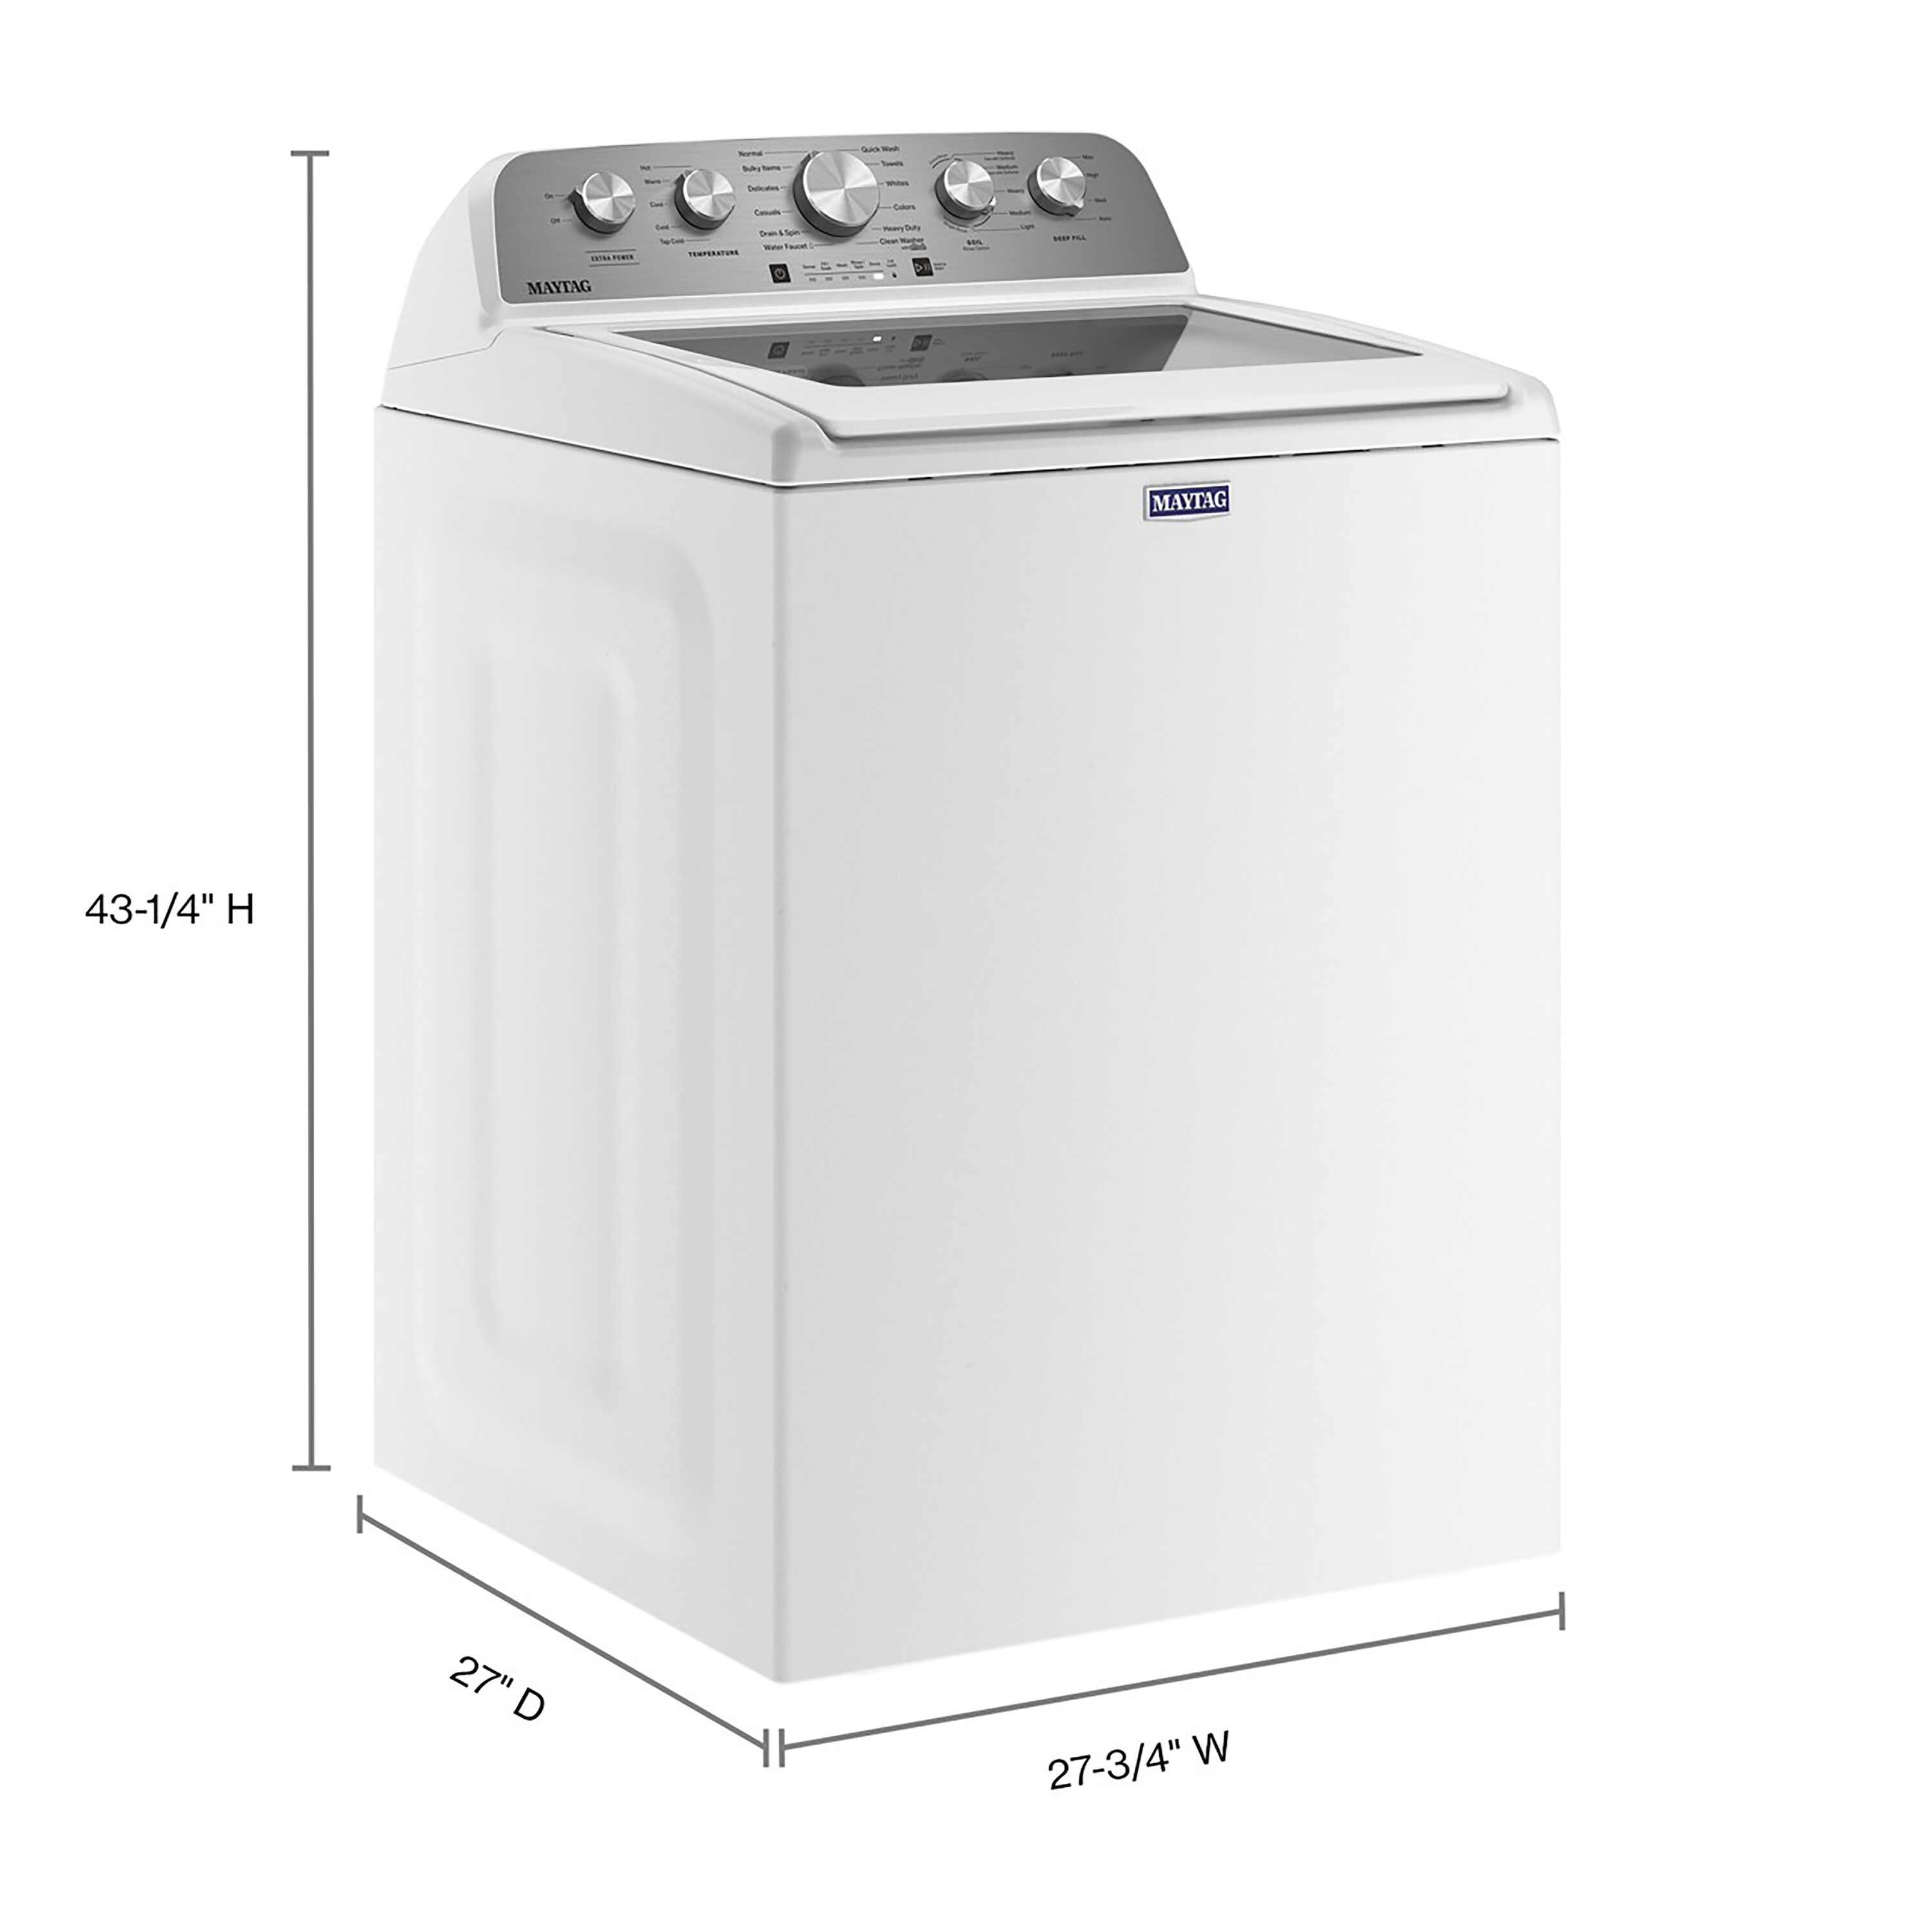 Maytag MHW6630HC Washer Review - Reviewed